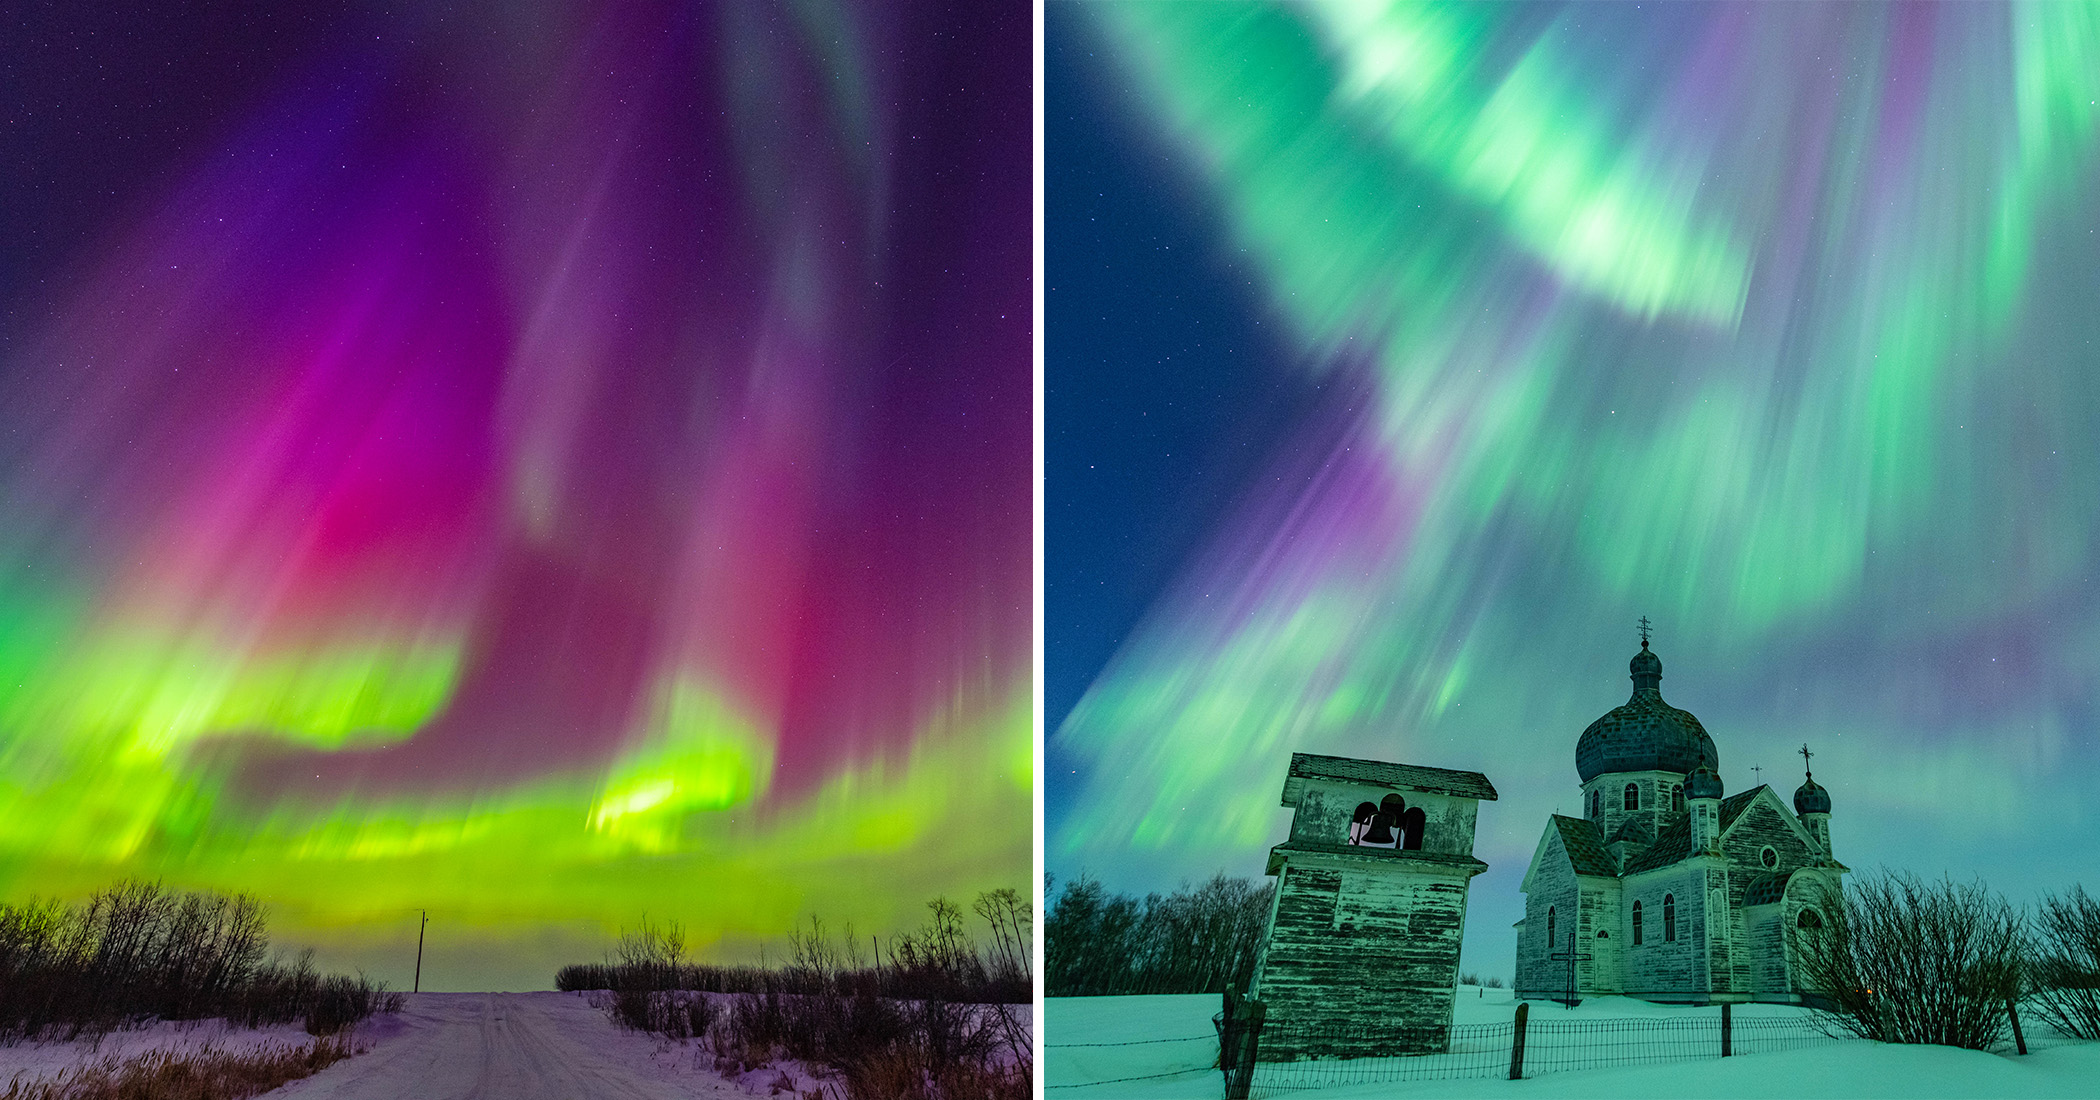 NextImg:PHOTOS: Storm chaser captures auroras during magnetic mayhem, bolts ripping through 'pancake' storm clouds